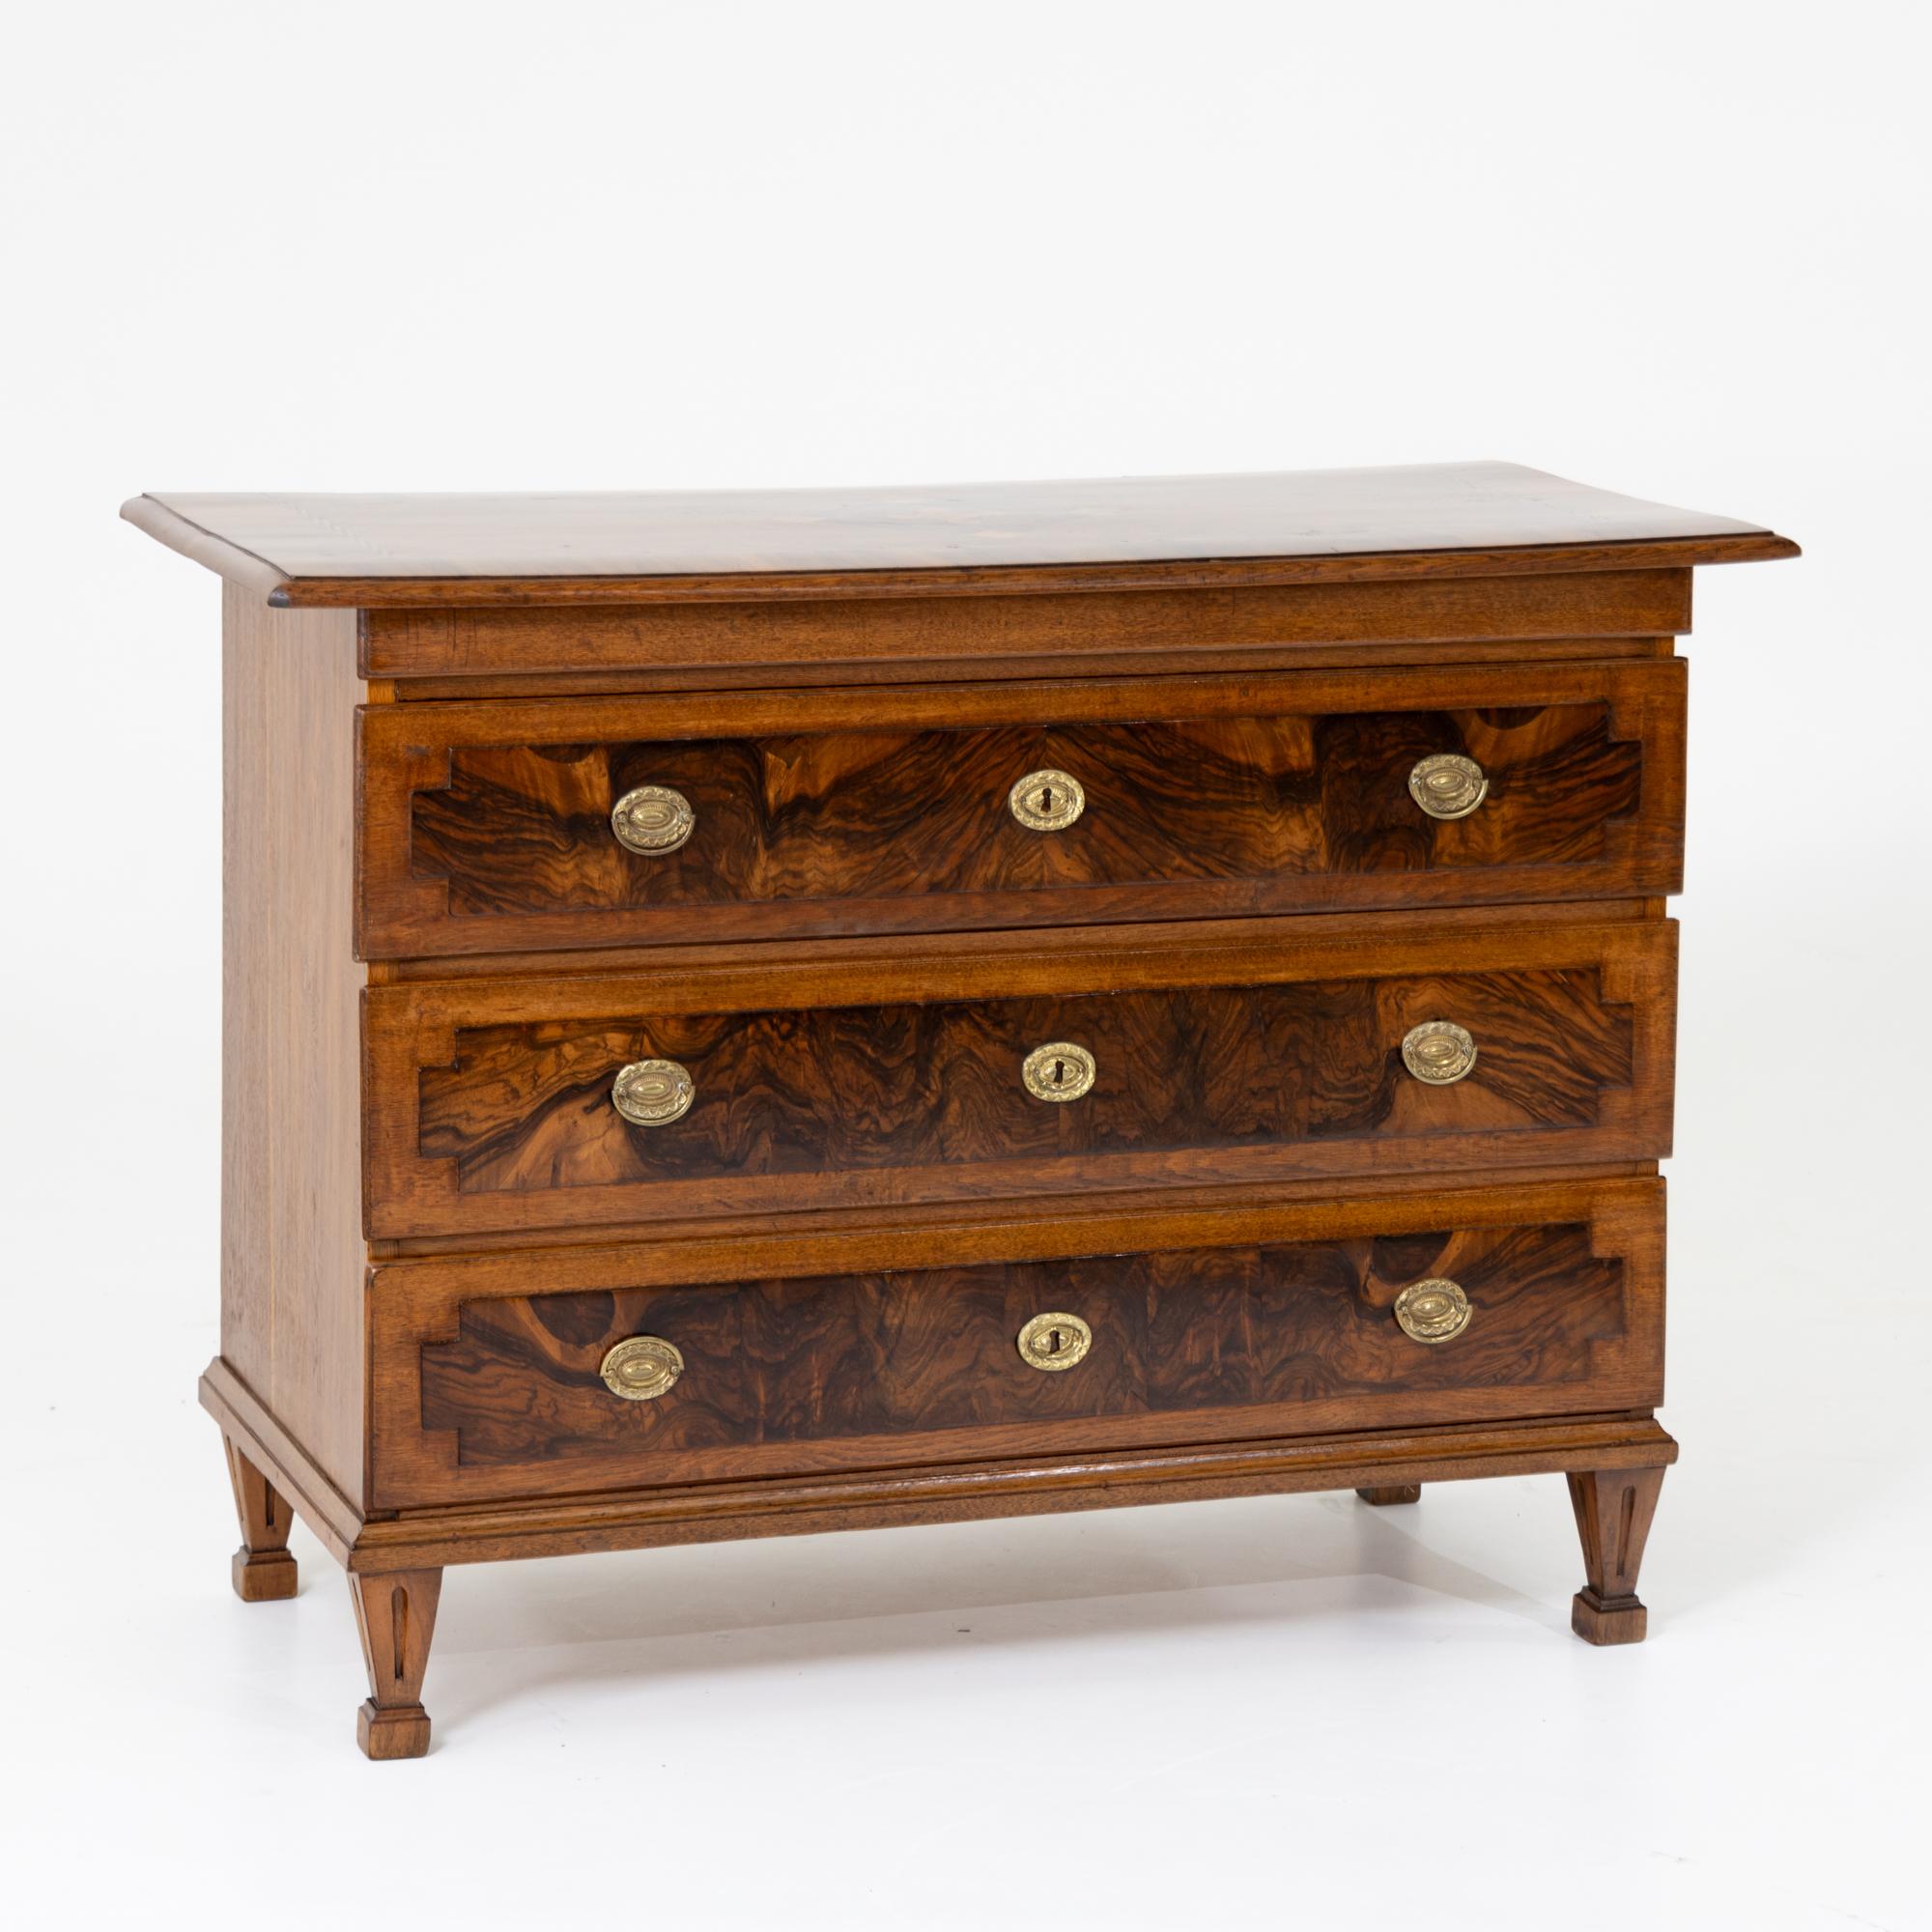 Louis Seize chest of drawers in oak with three drawers and socketed square pointed feet. The chest of drawers is set in root burl on the front and the top shows inlay work in the form of fillet bands and a central diamond motif made of different,